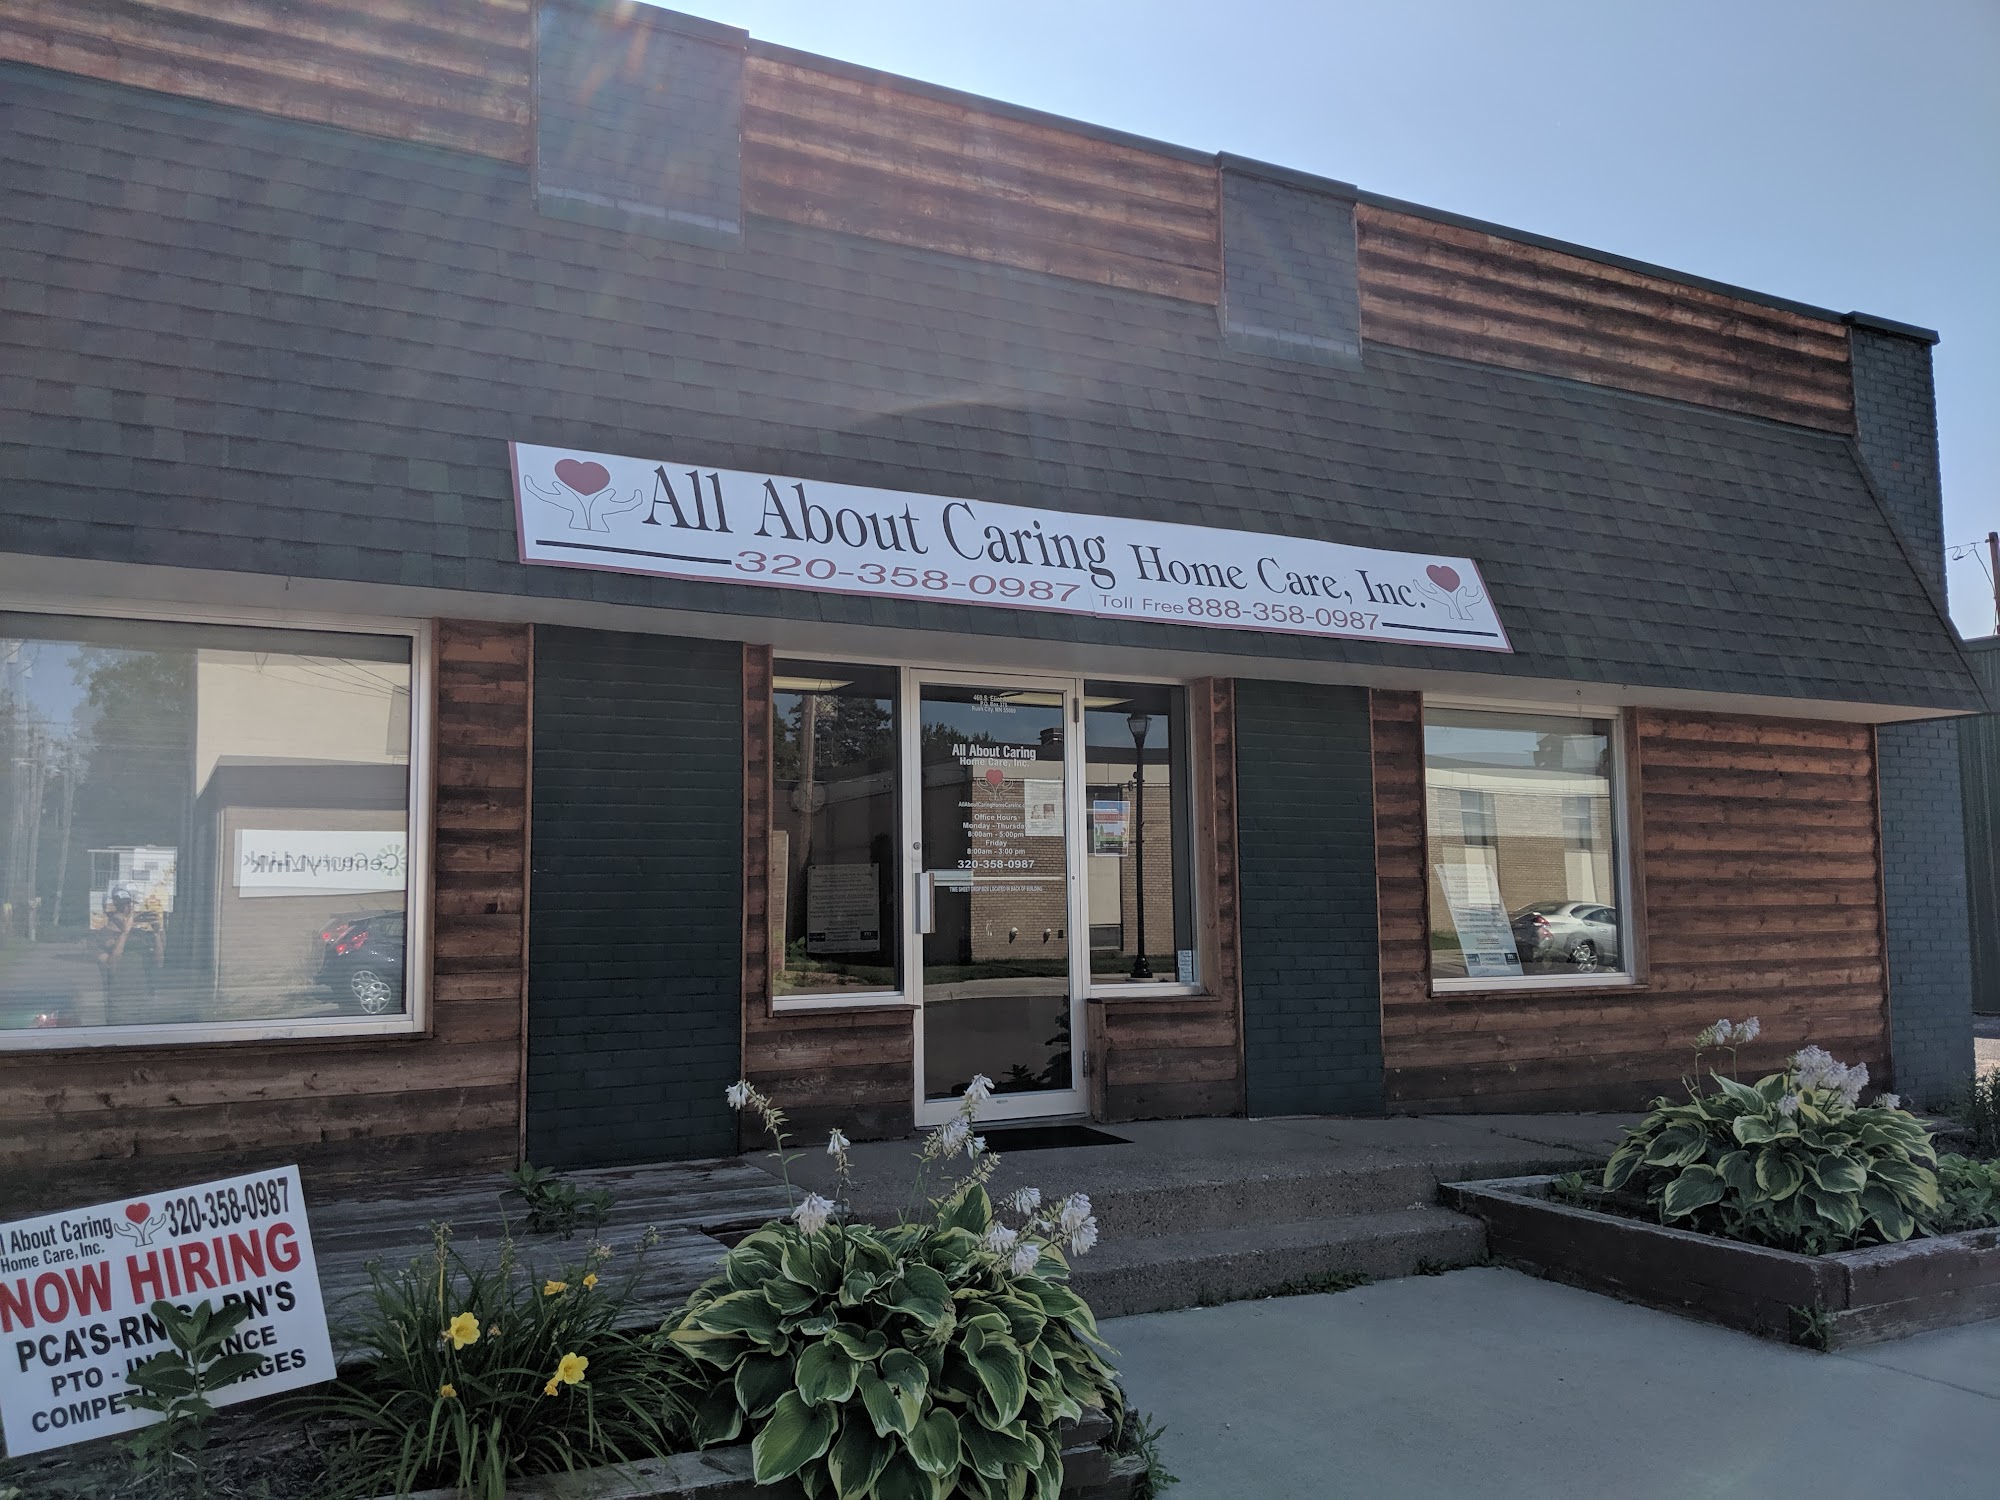 All About Caring Home Care 460 S Eliot Ave, Rush City Minnesota 55069